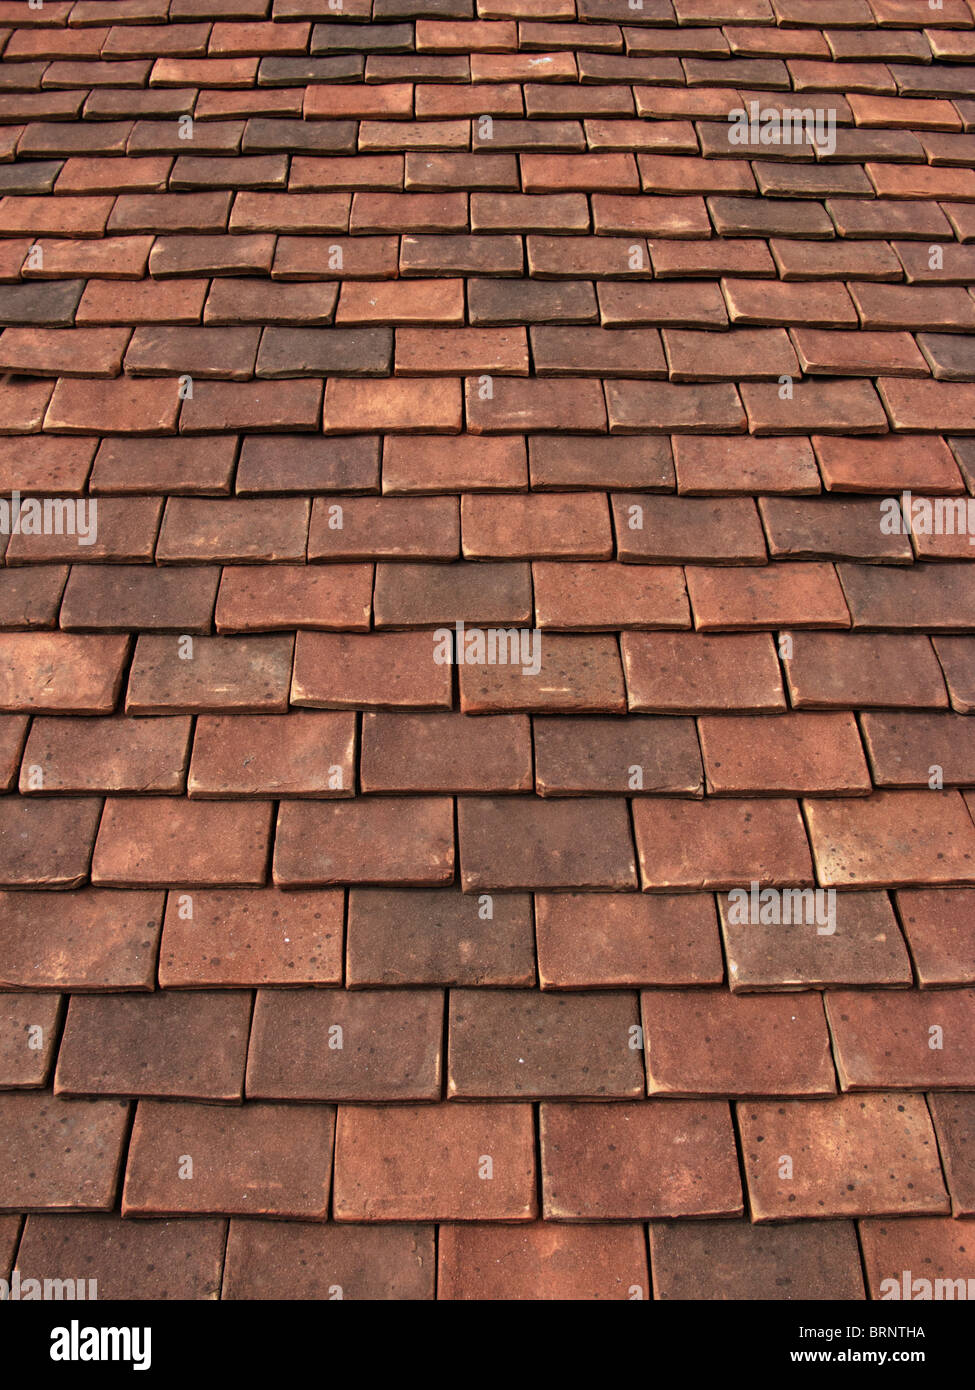 close up detail image of roof tiles Stock Photo